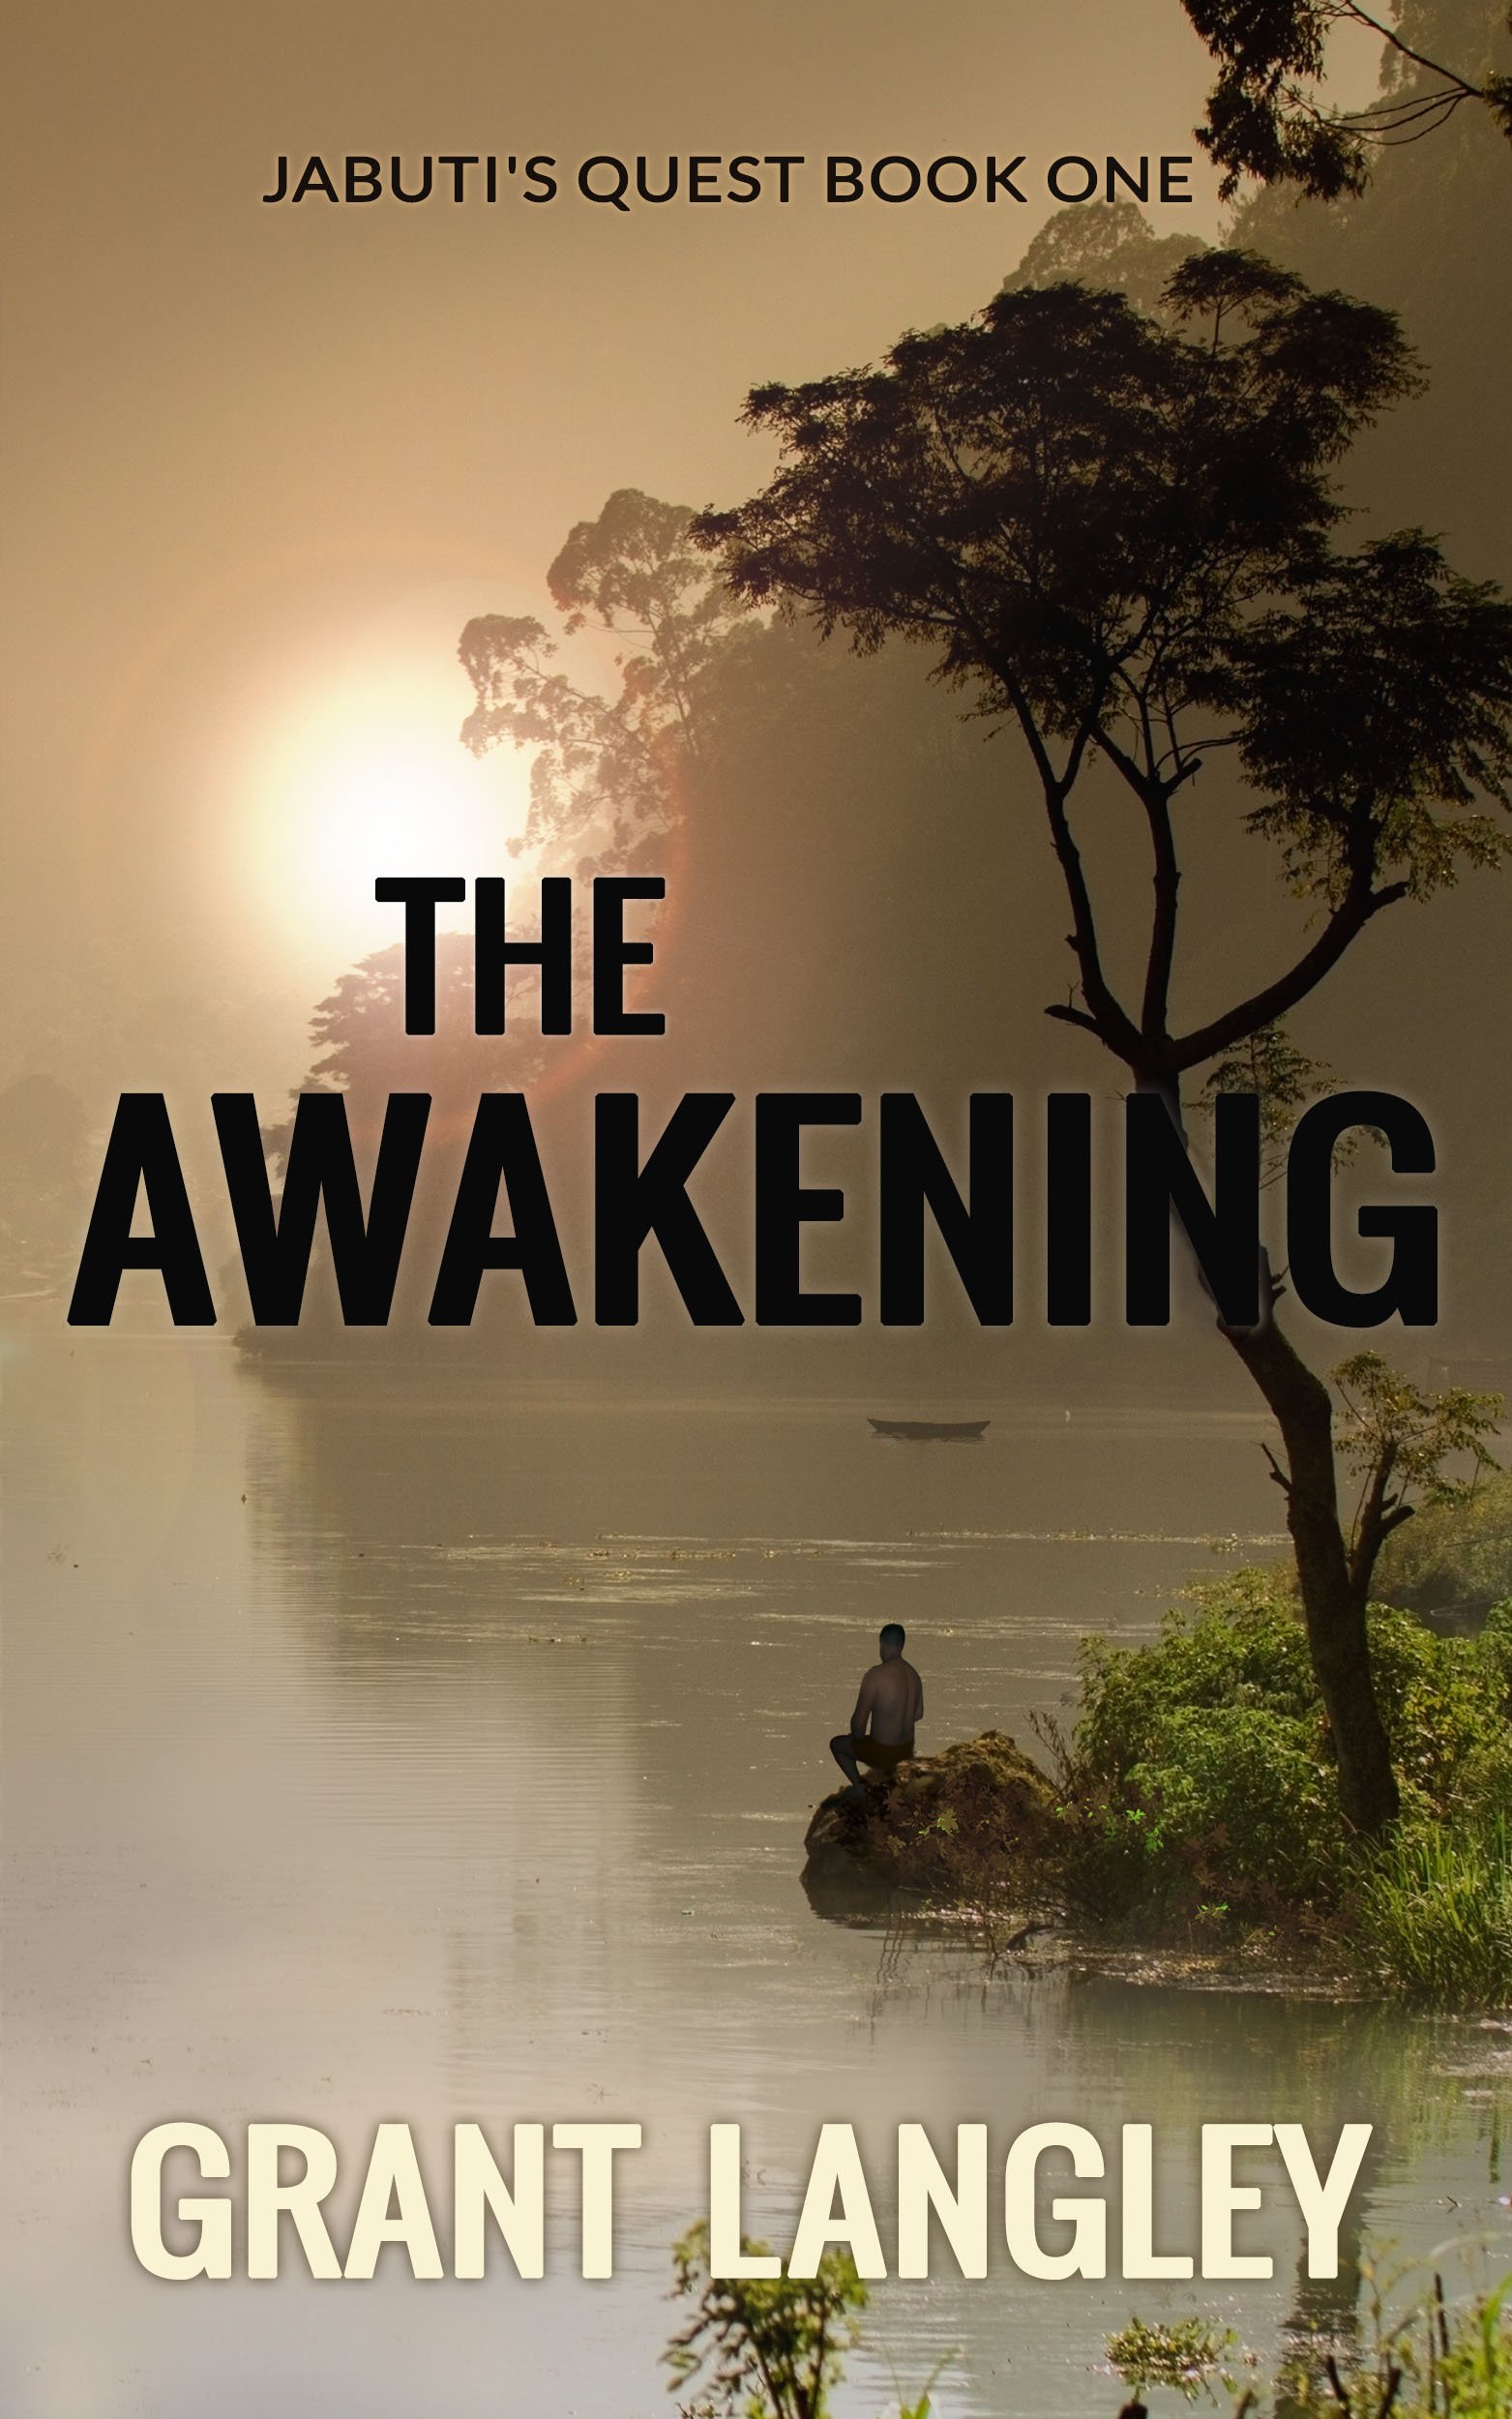 the awakening - cover - 5x8_bw_250pages_whitepaper - 2018-11-04 quality high1121647222..jpg